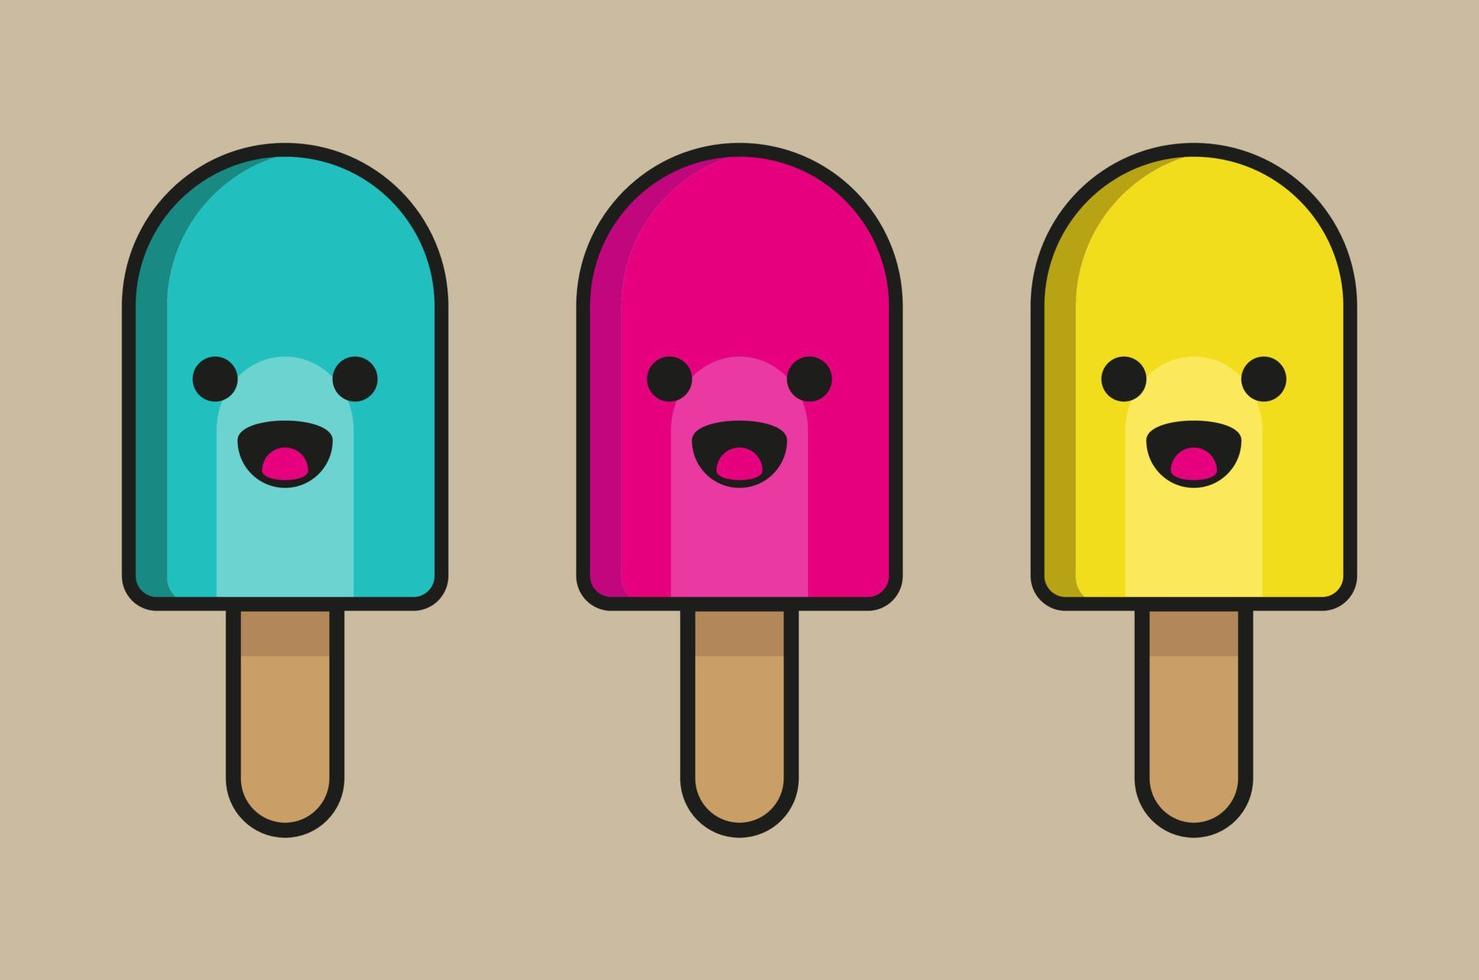 A cute vector illustration of three ice lollies